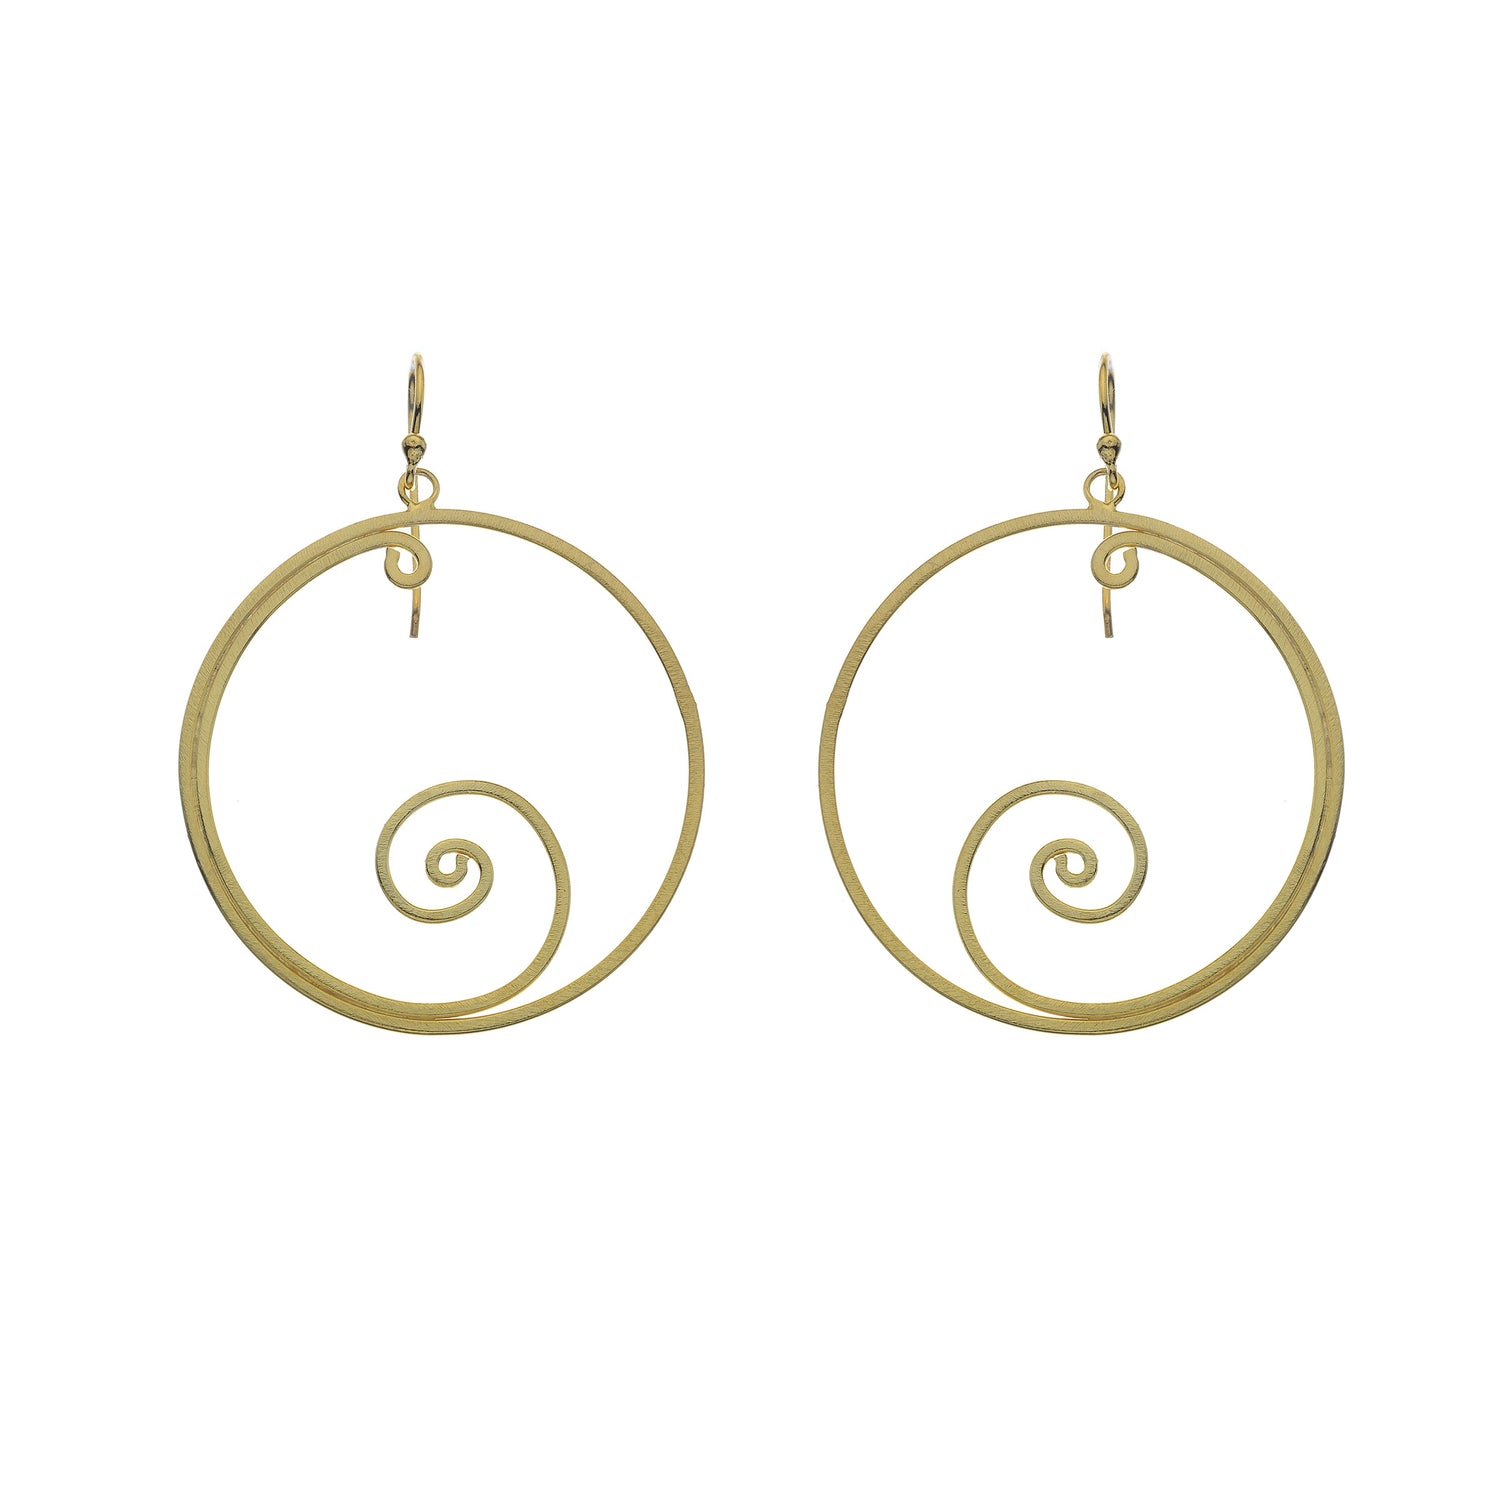 Silver Origins Gold plated/Silver Earrings - Sands Boutique clothing and gifts